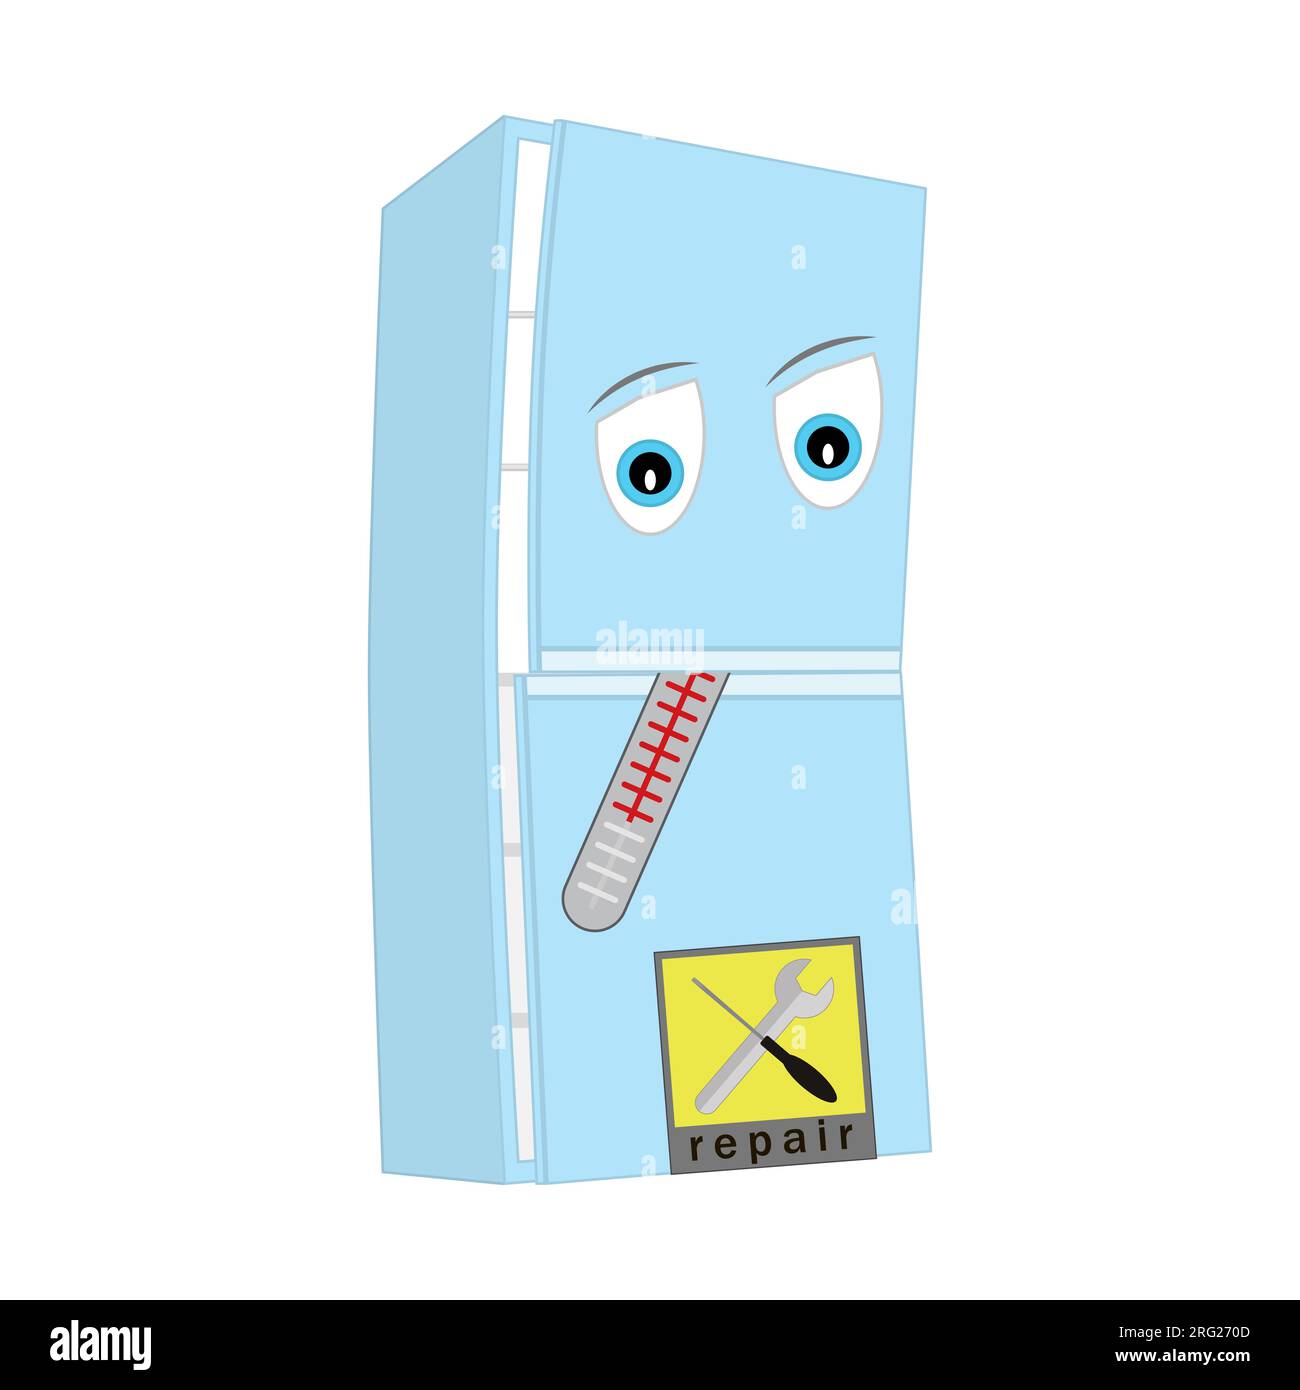 Sick broken fridge that needs repair. With a thermometer in the mouth. Signboard with text repair. Animated cartoon character on white background. Stock Vector